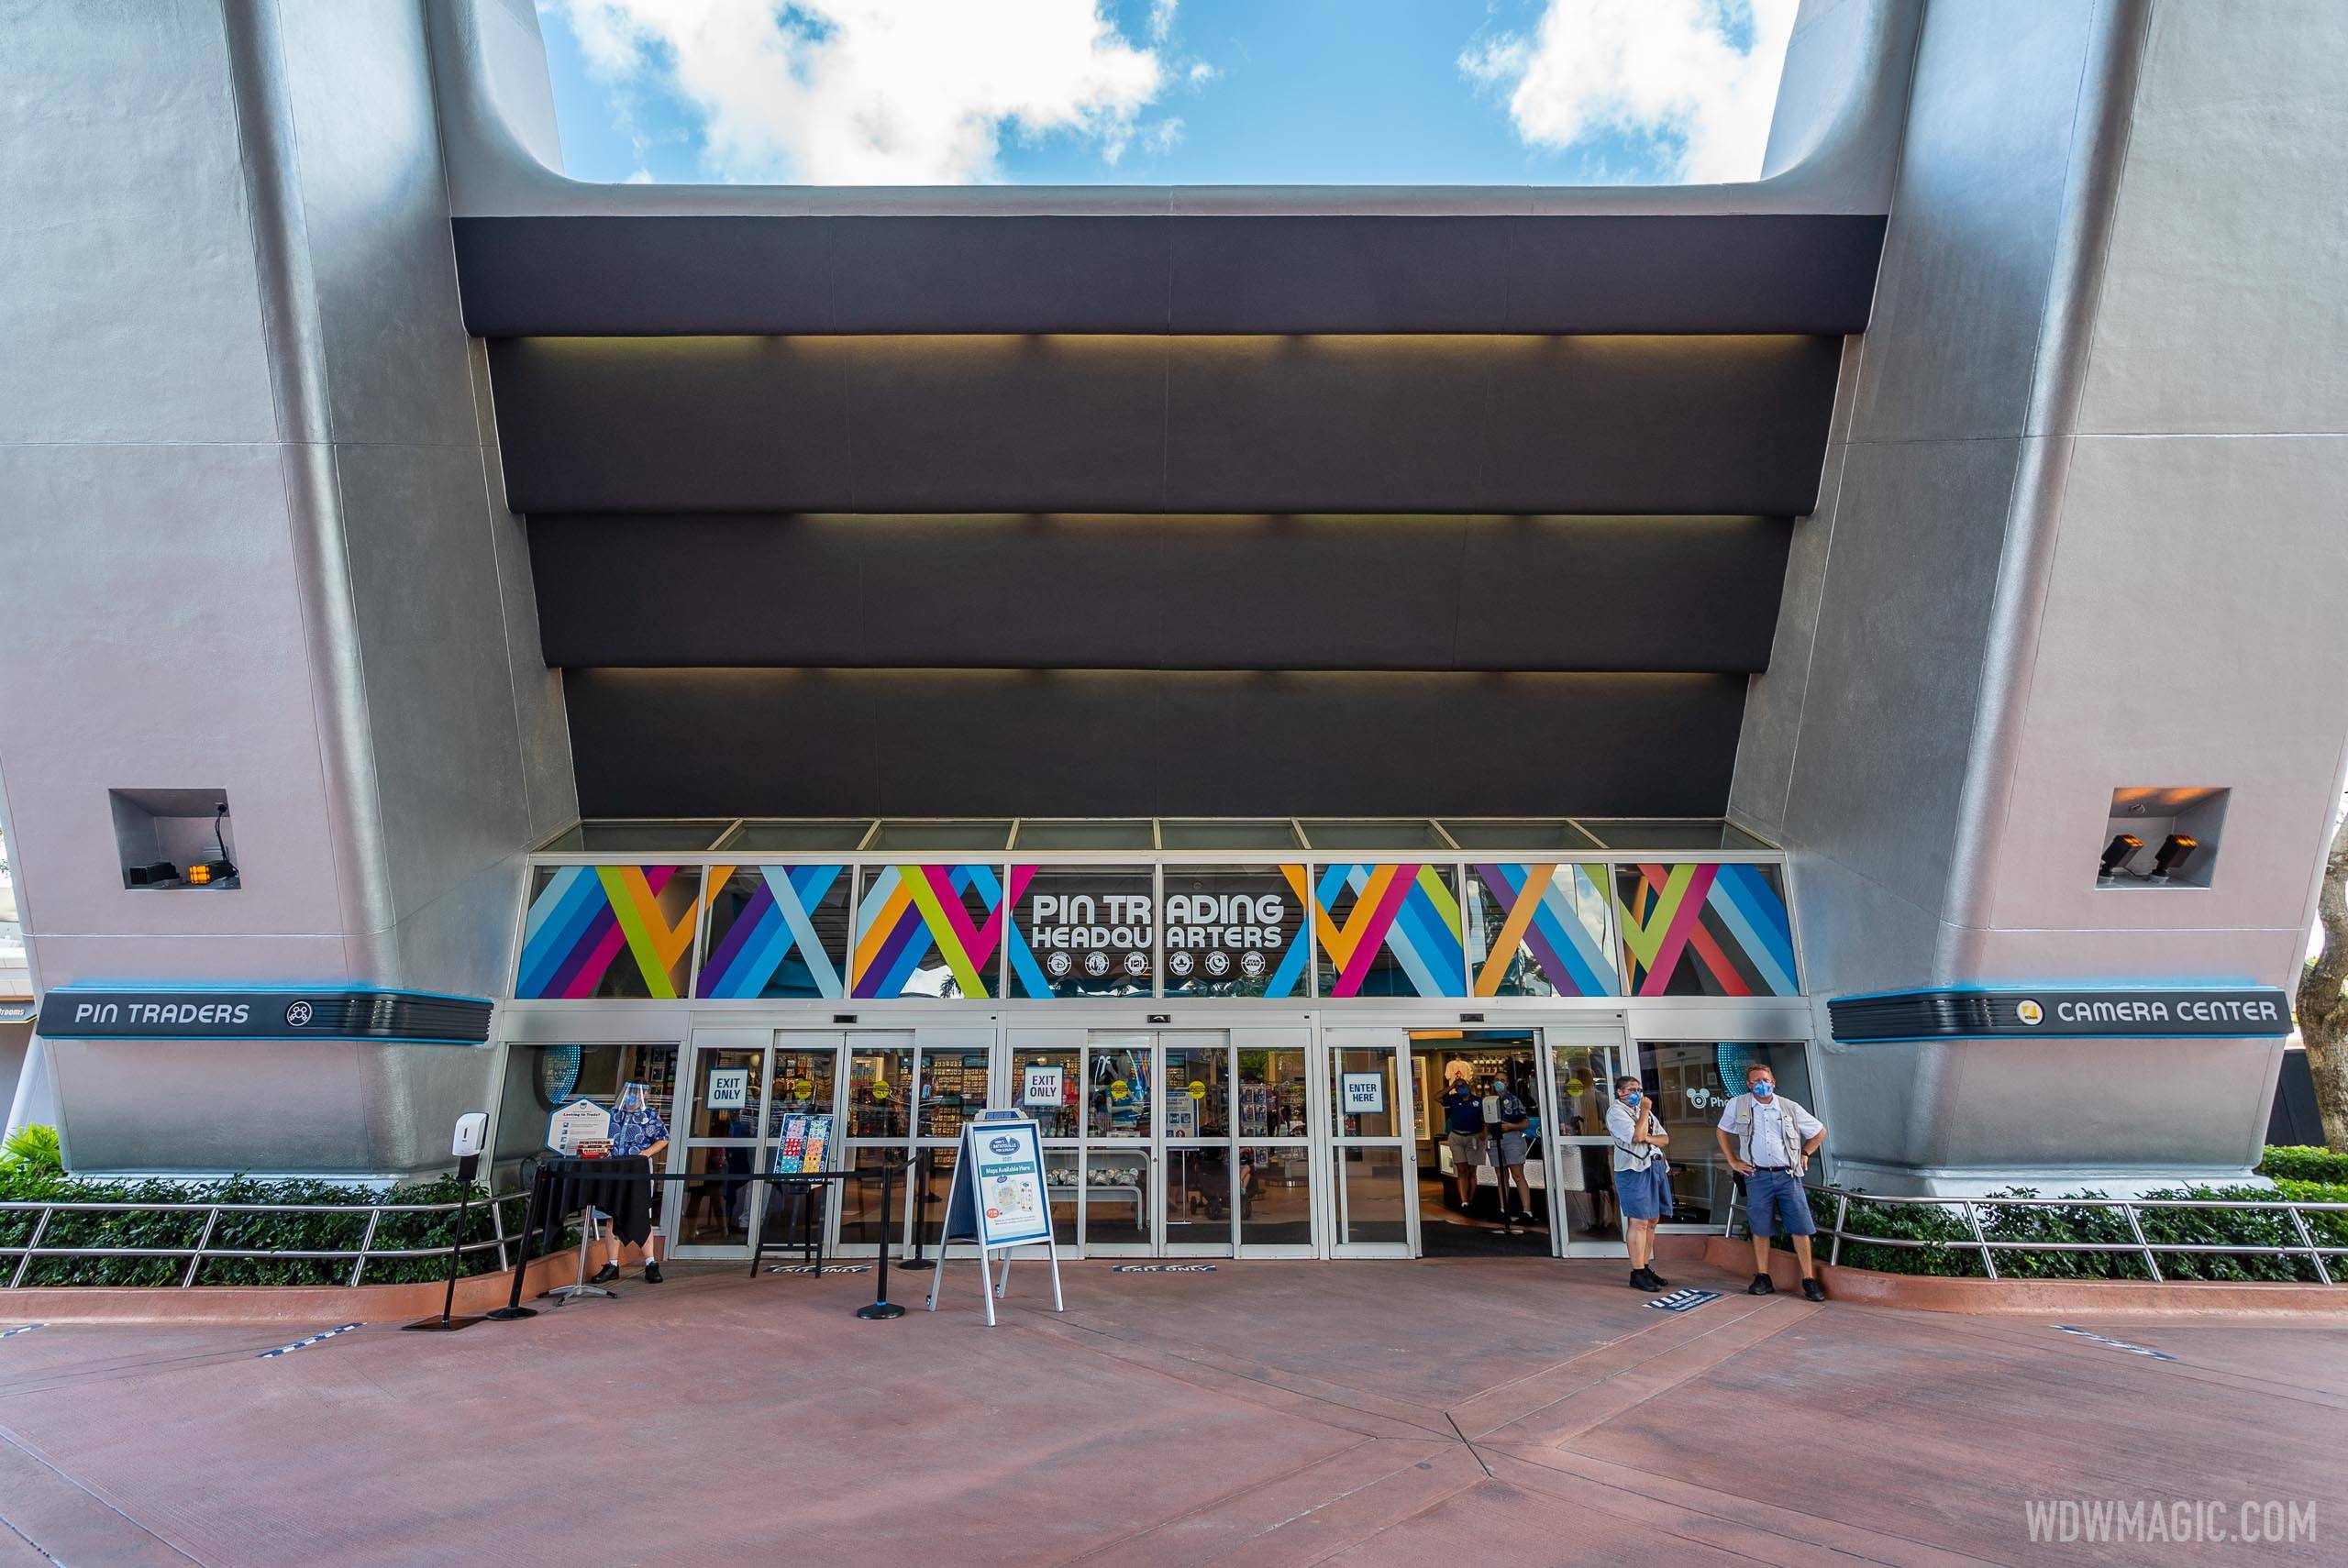 PHOTOS - Another new look for the exterior of 'Pin Traders and Camera Center' at EPCOT